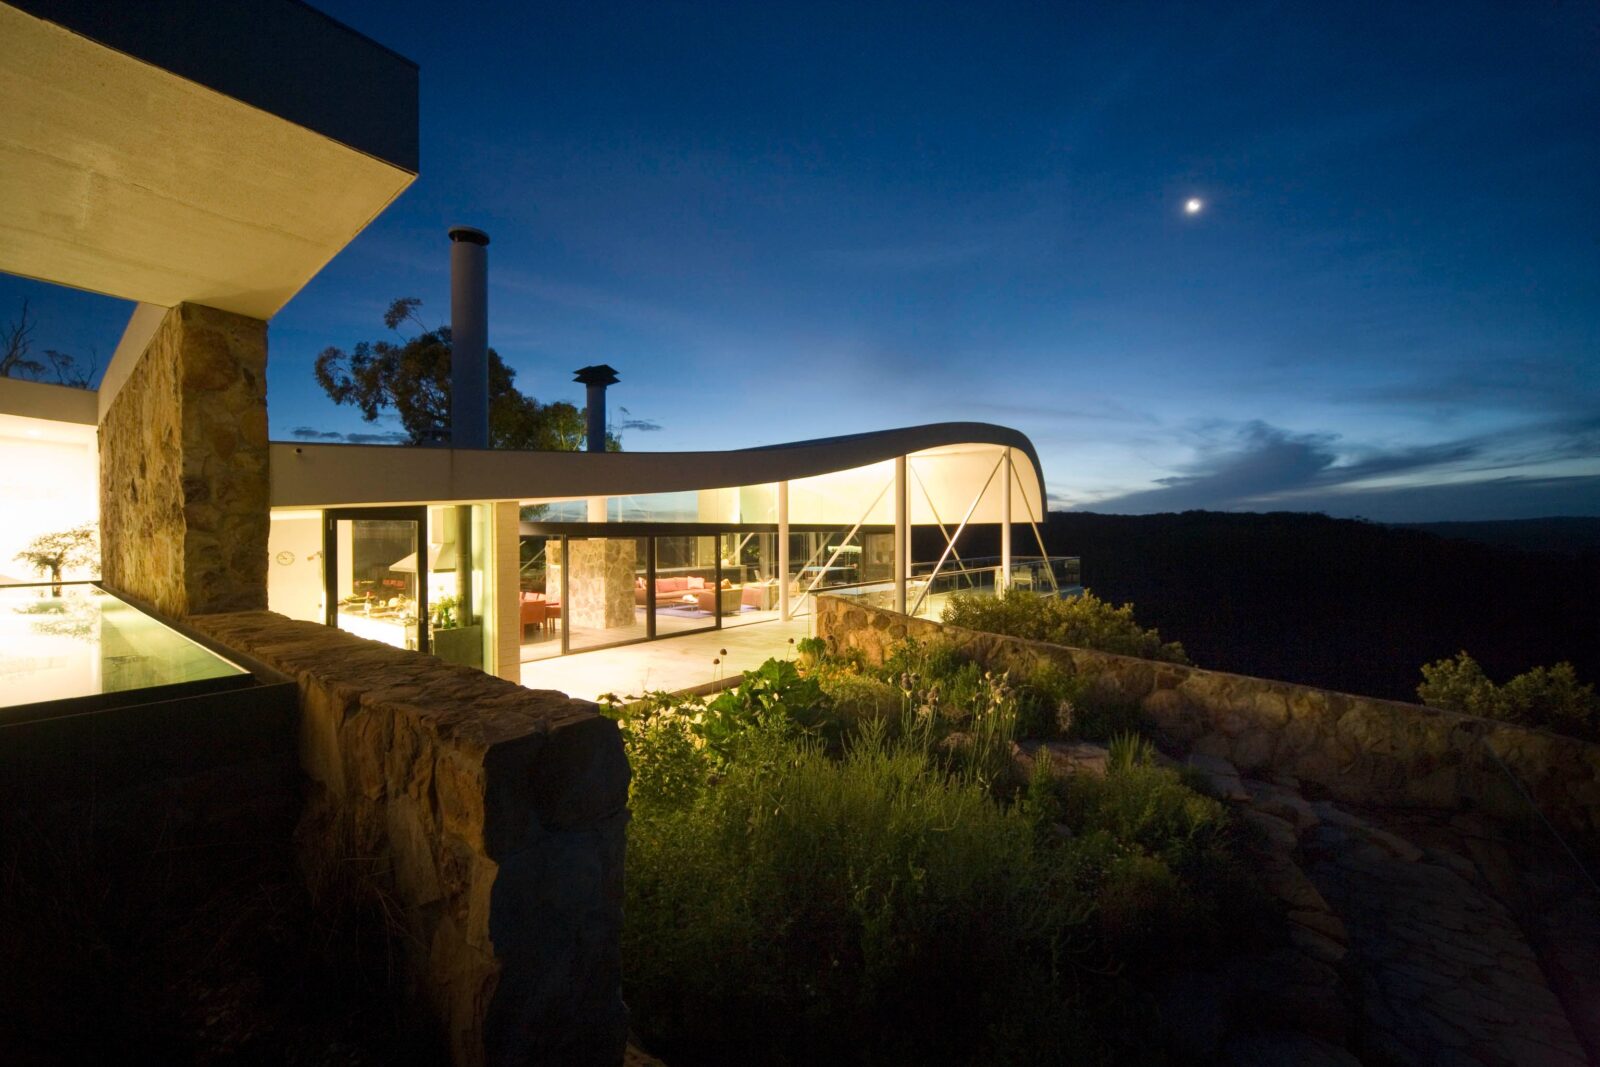 The Seidler House at night